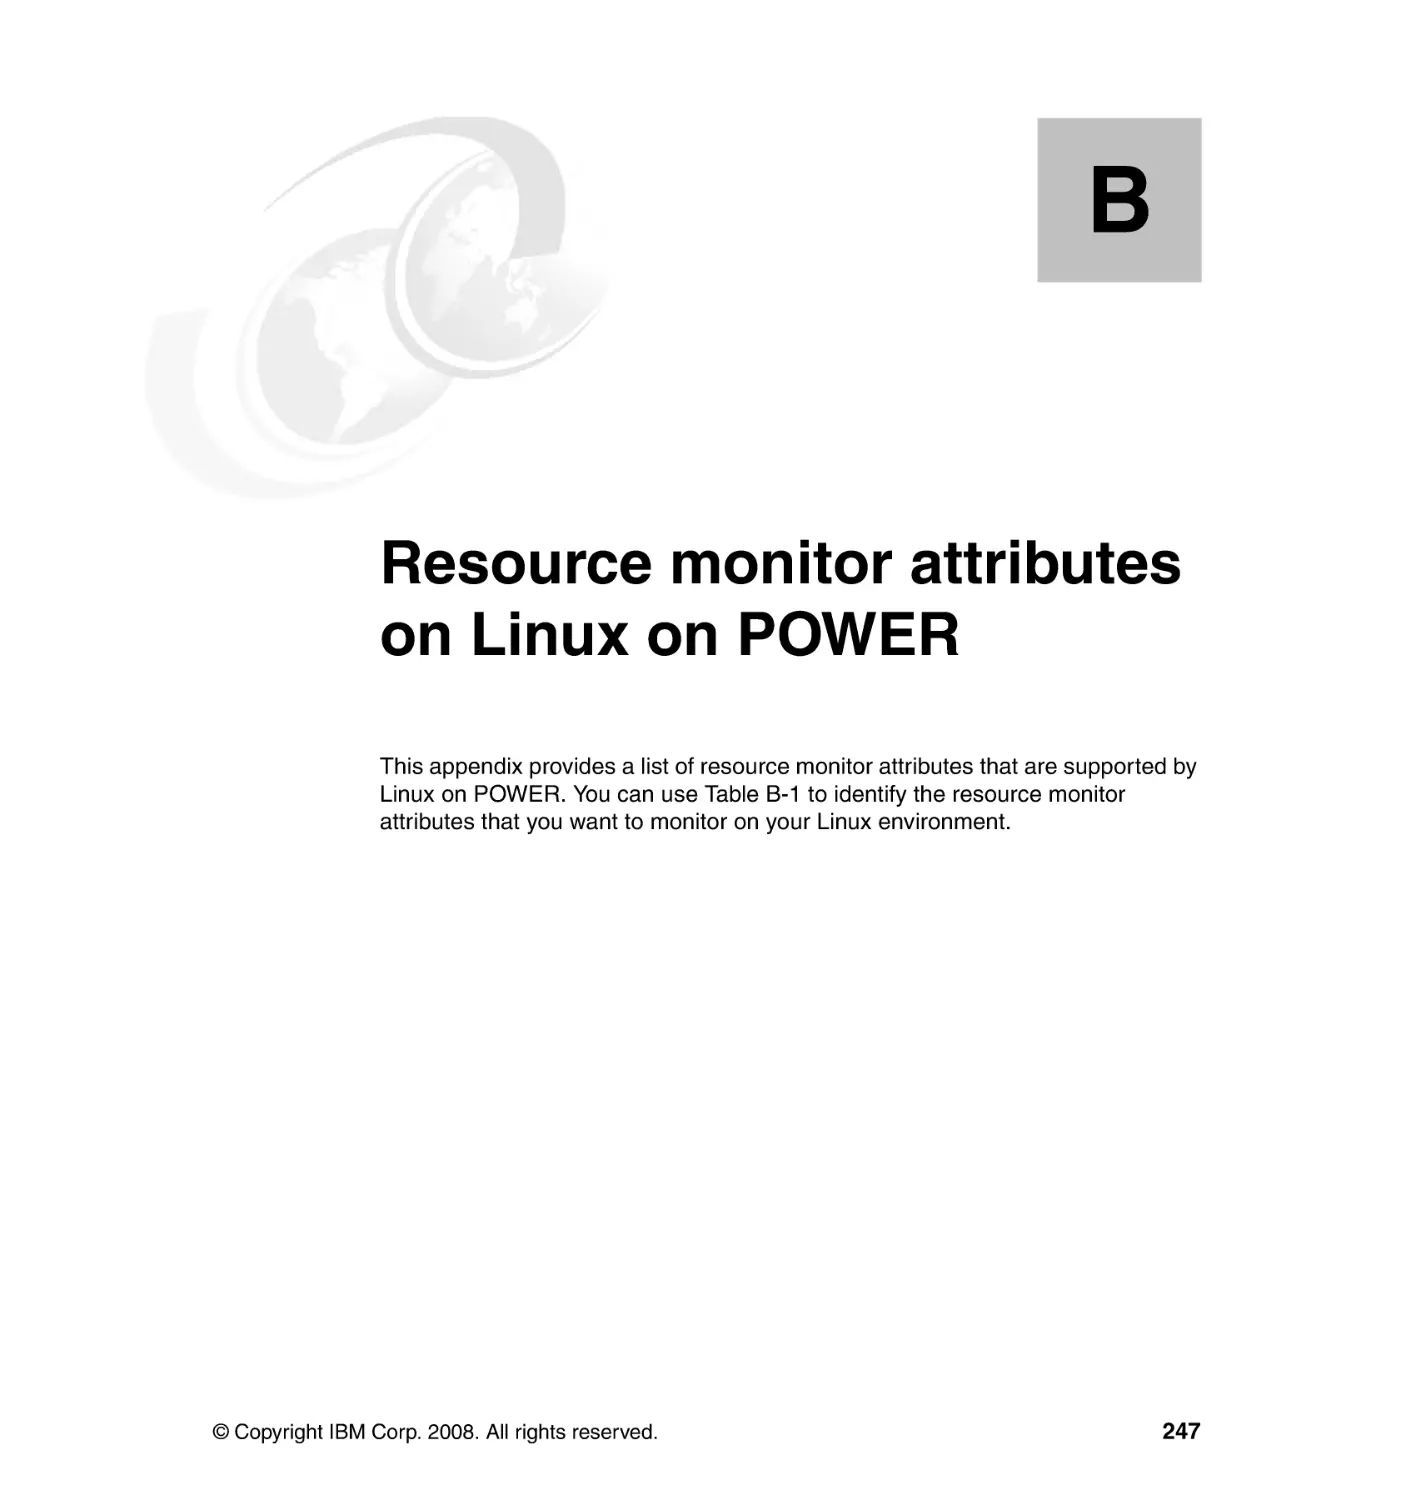 Appendix B. Resource monitor attributes on Linux on POWER